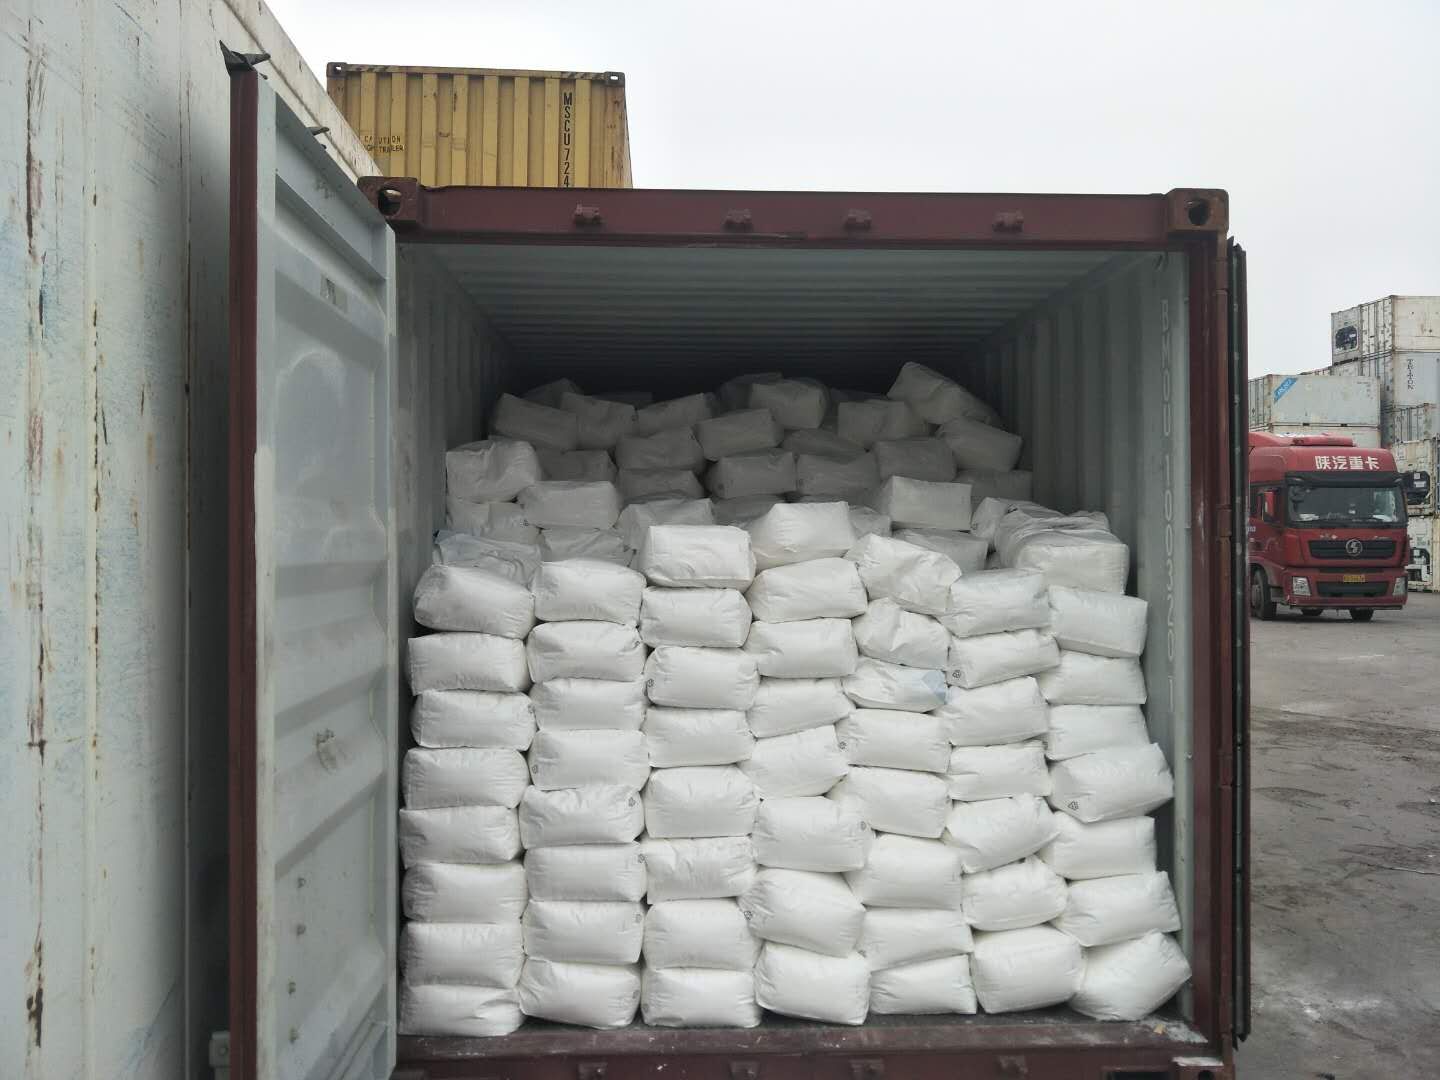 cationic polyacrylamide of flopam FO 4190 SEP can be replaced by Chinafloc  C3012, China cationic polyacrylamide of flopam FO 4190 SEP can be replaced  by Chinafloc C3012 manufacturer and supplier - CHINAFLOC